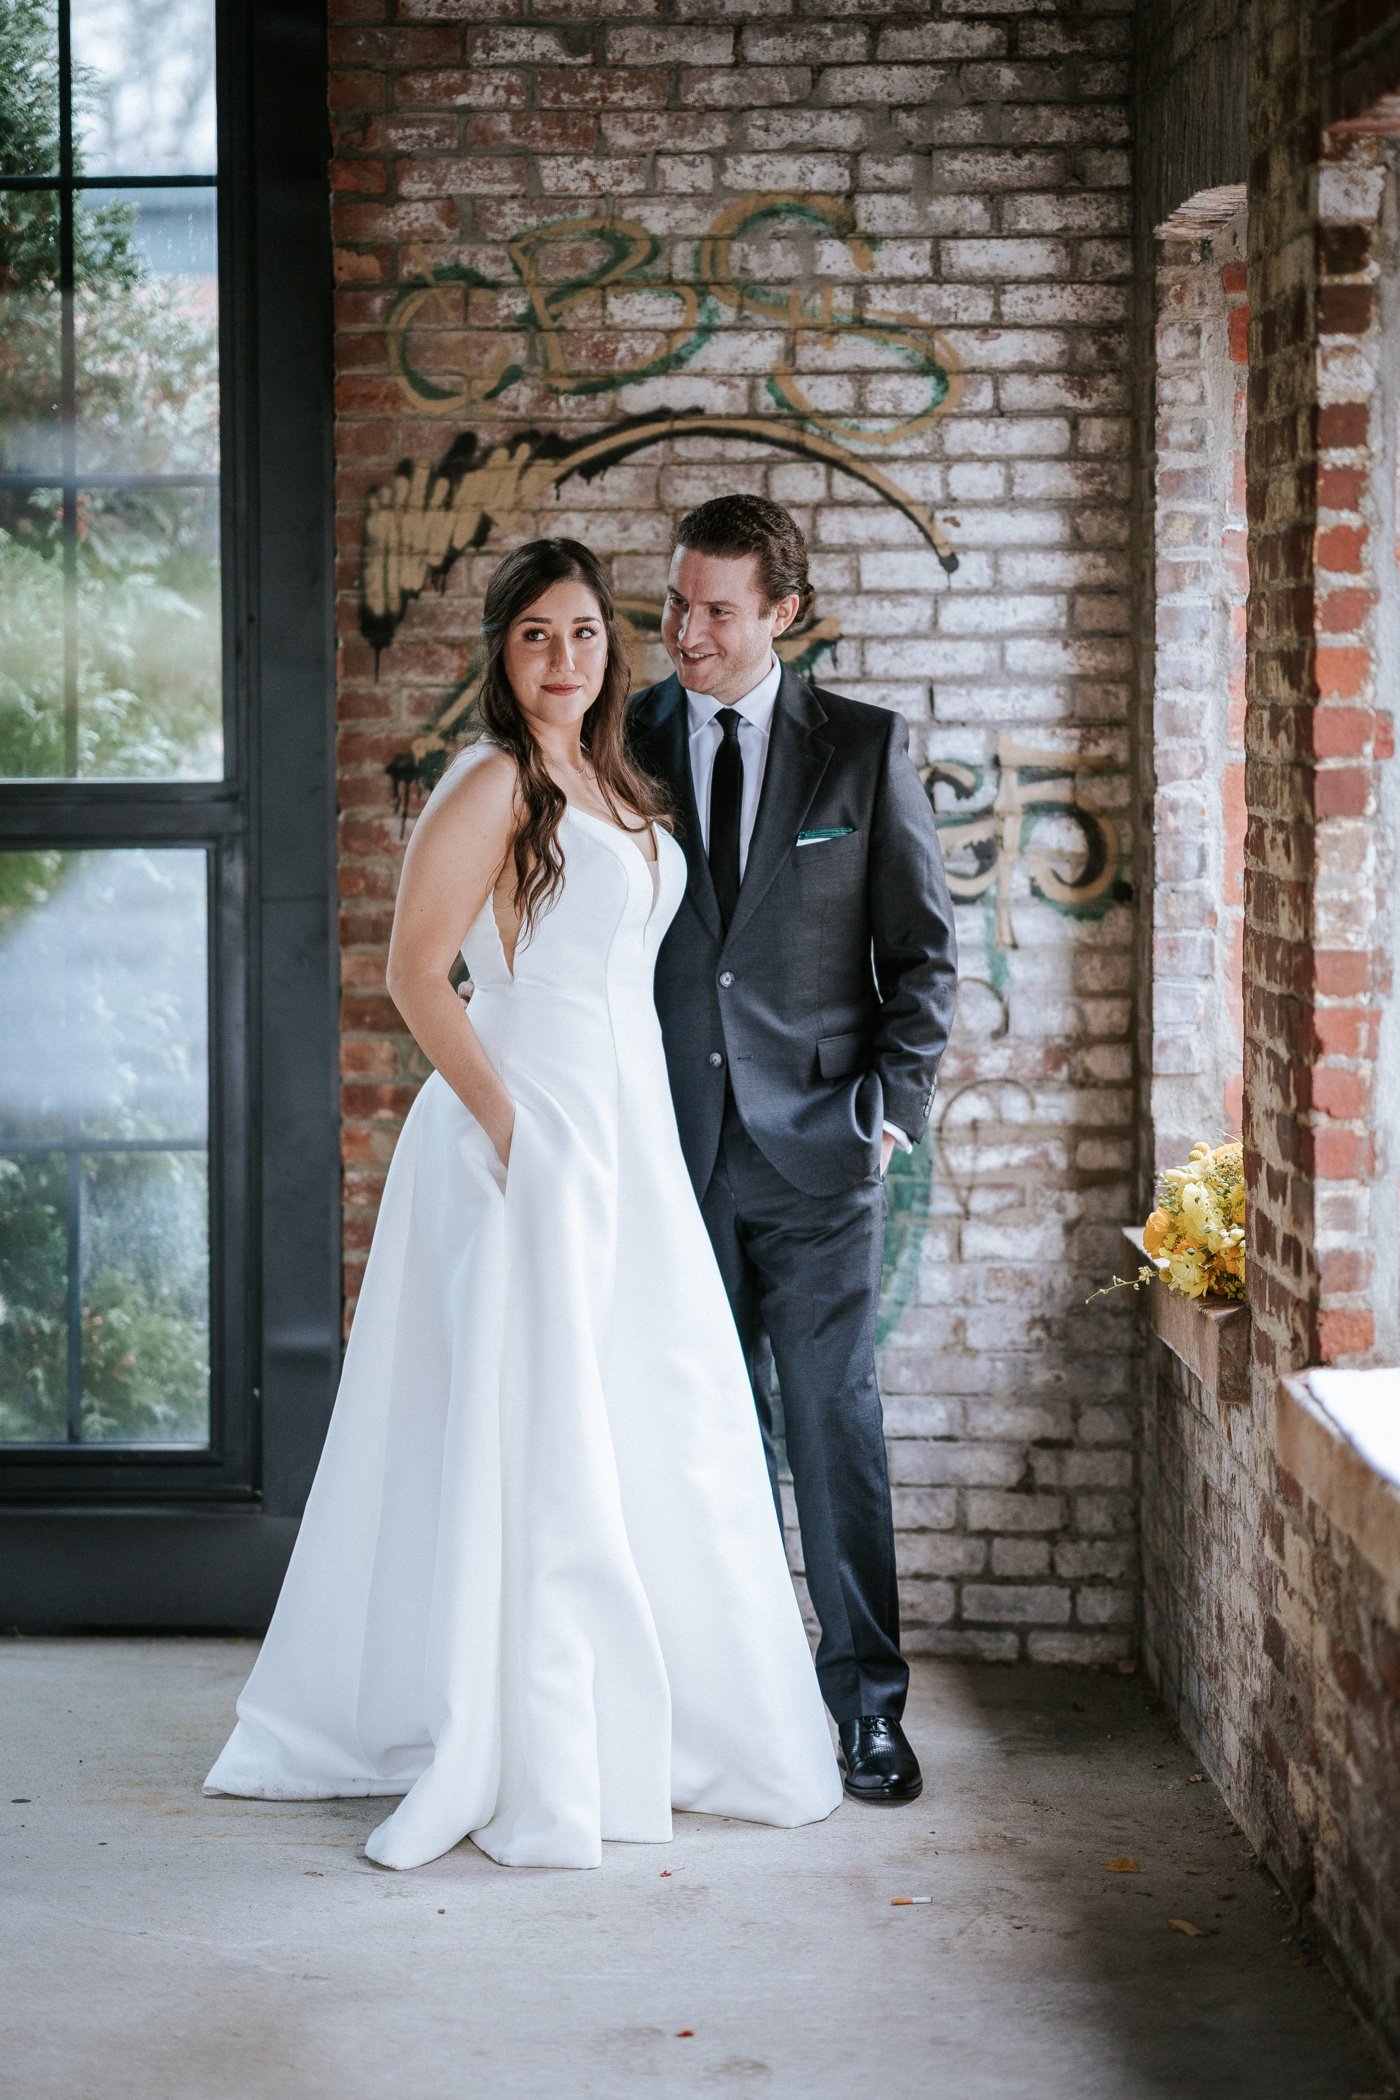 Bridal portraits at The Roundhouse